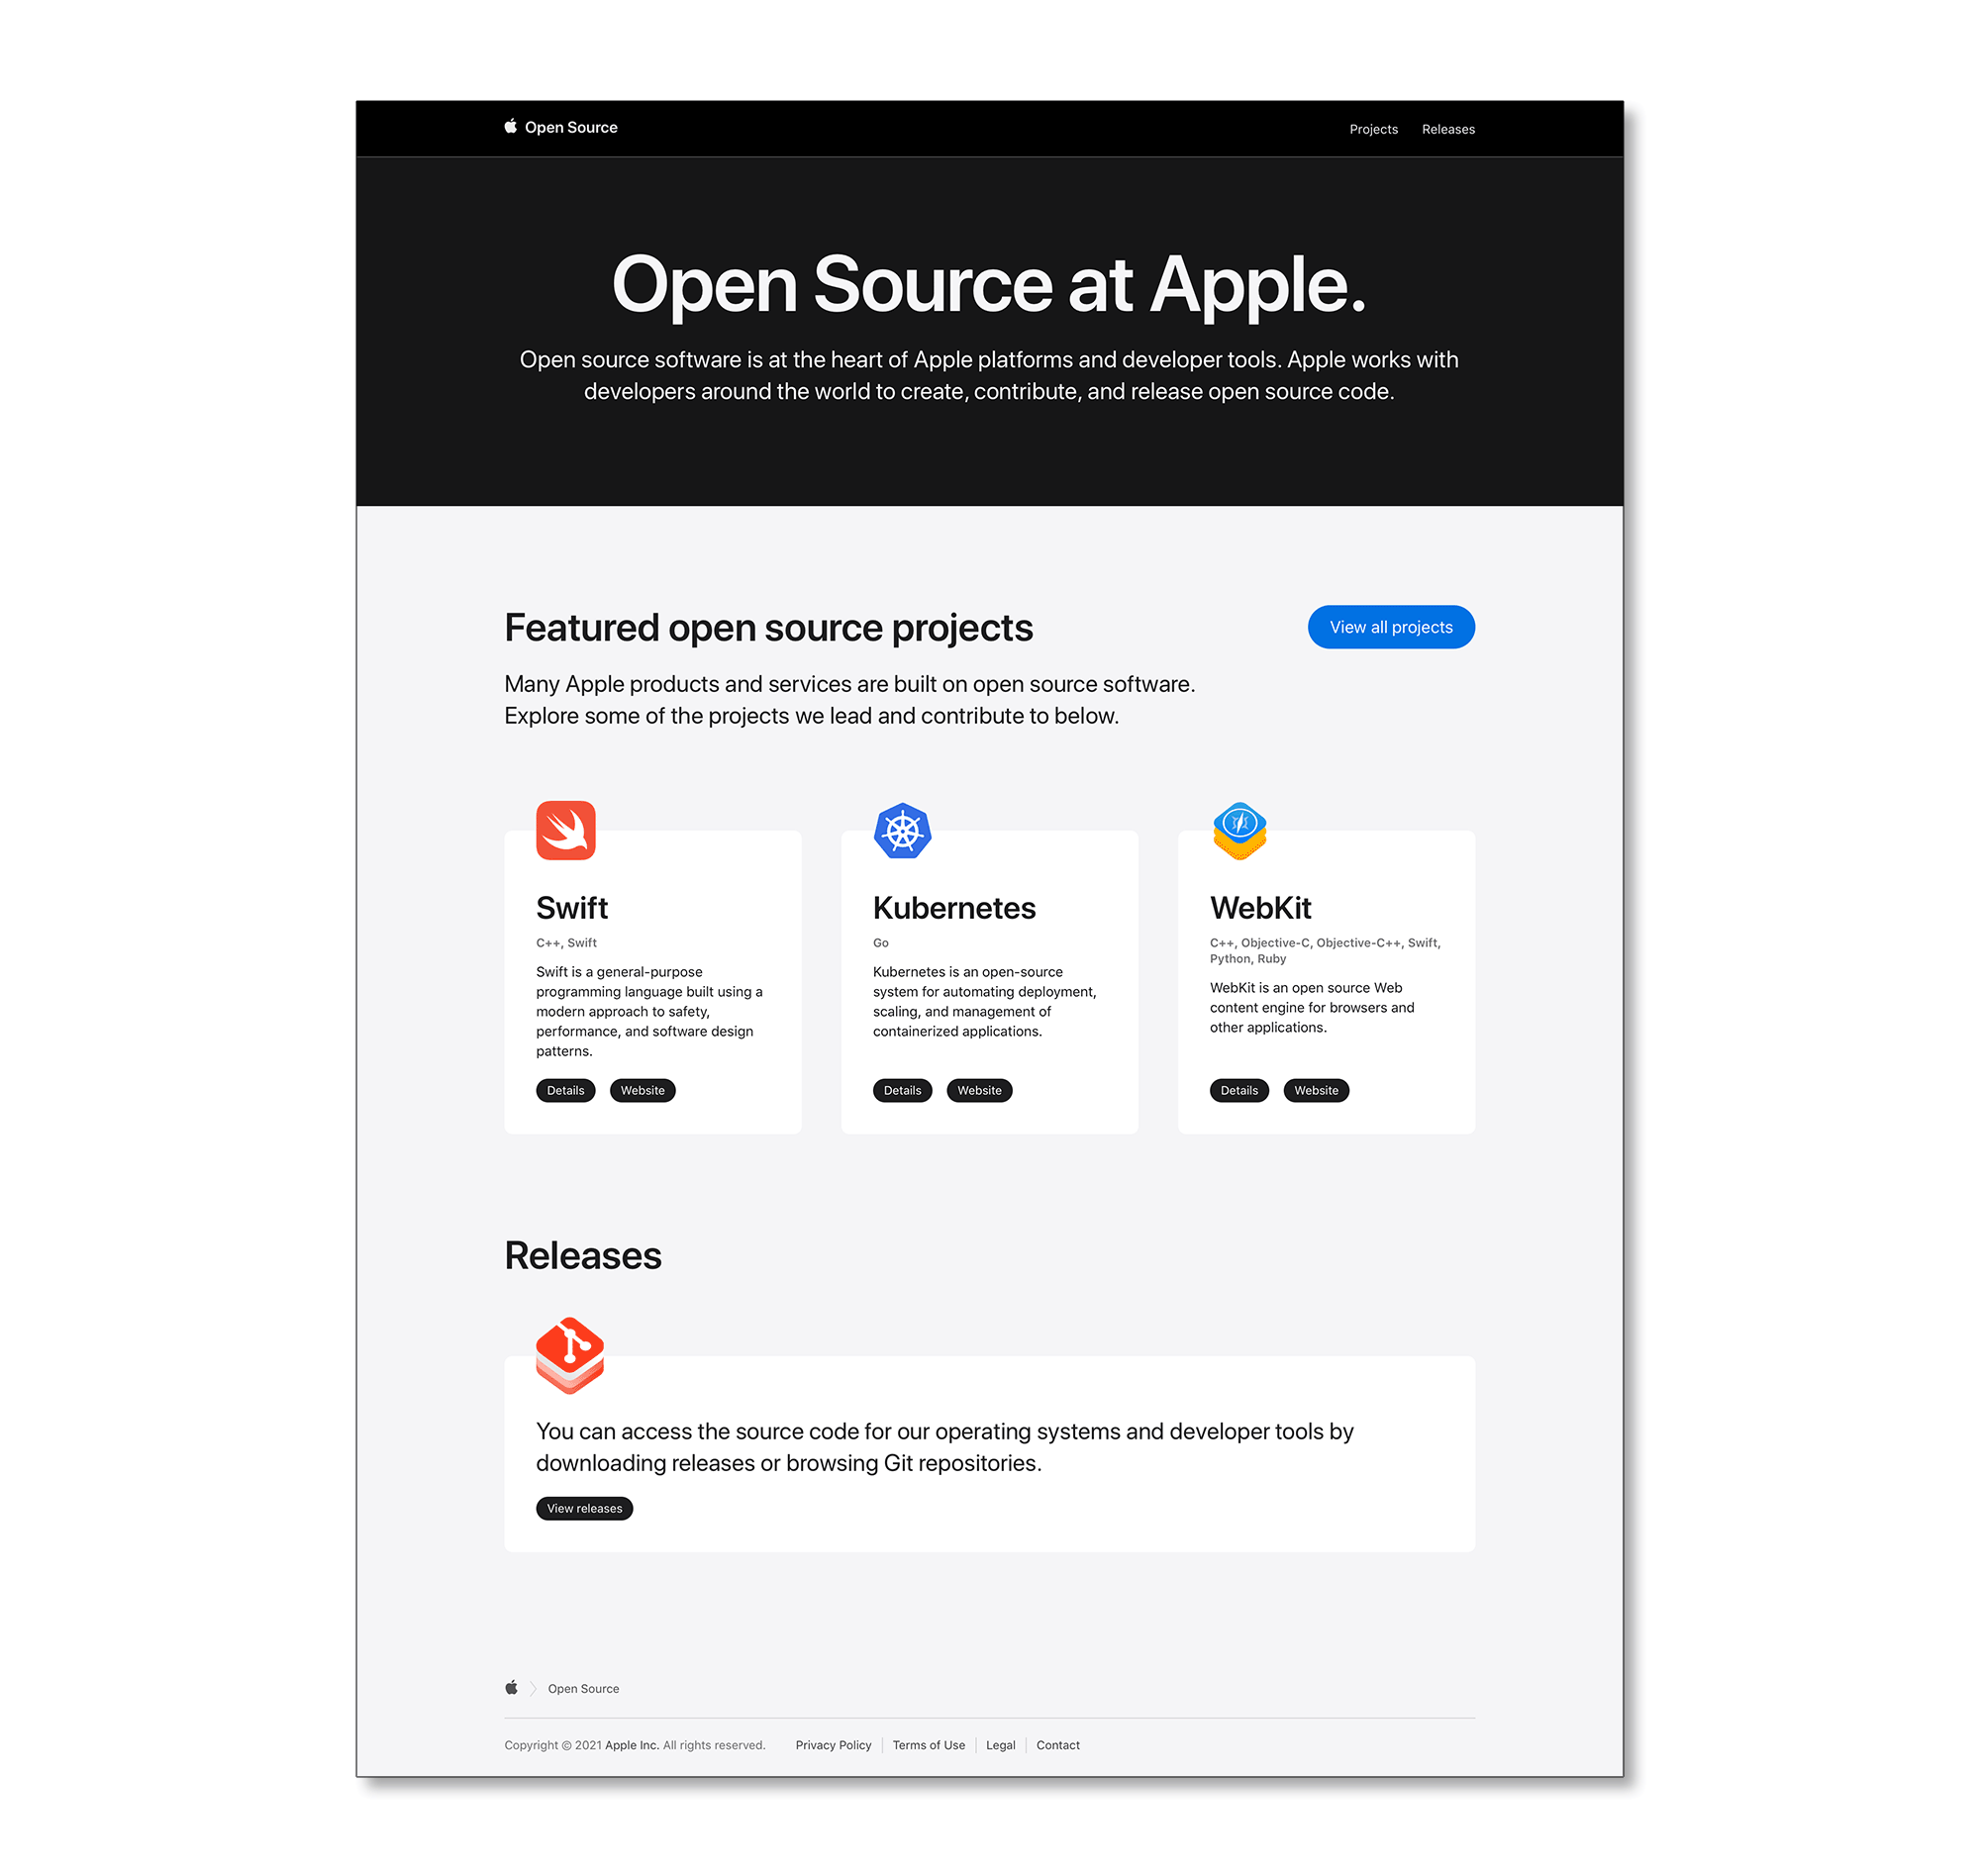 Open Source at Apple Landing Page